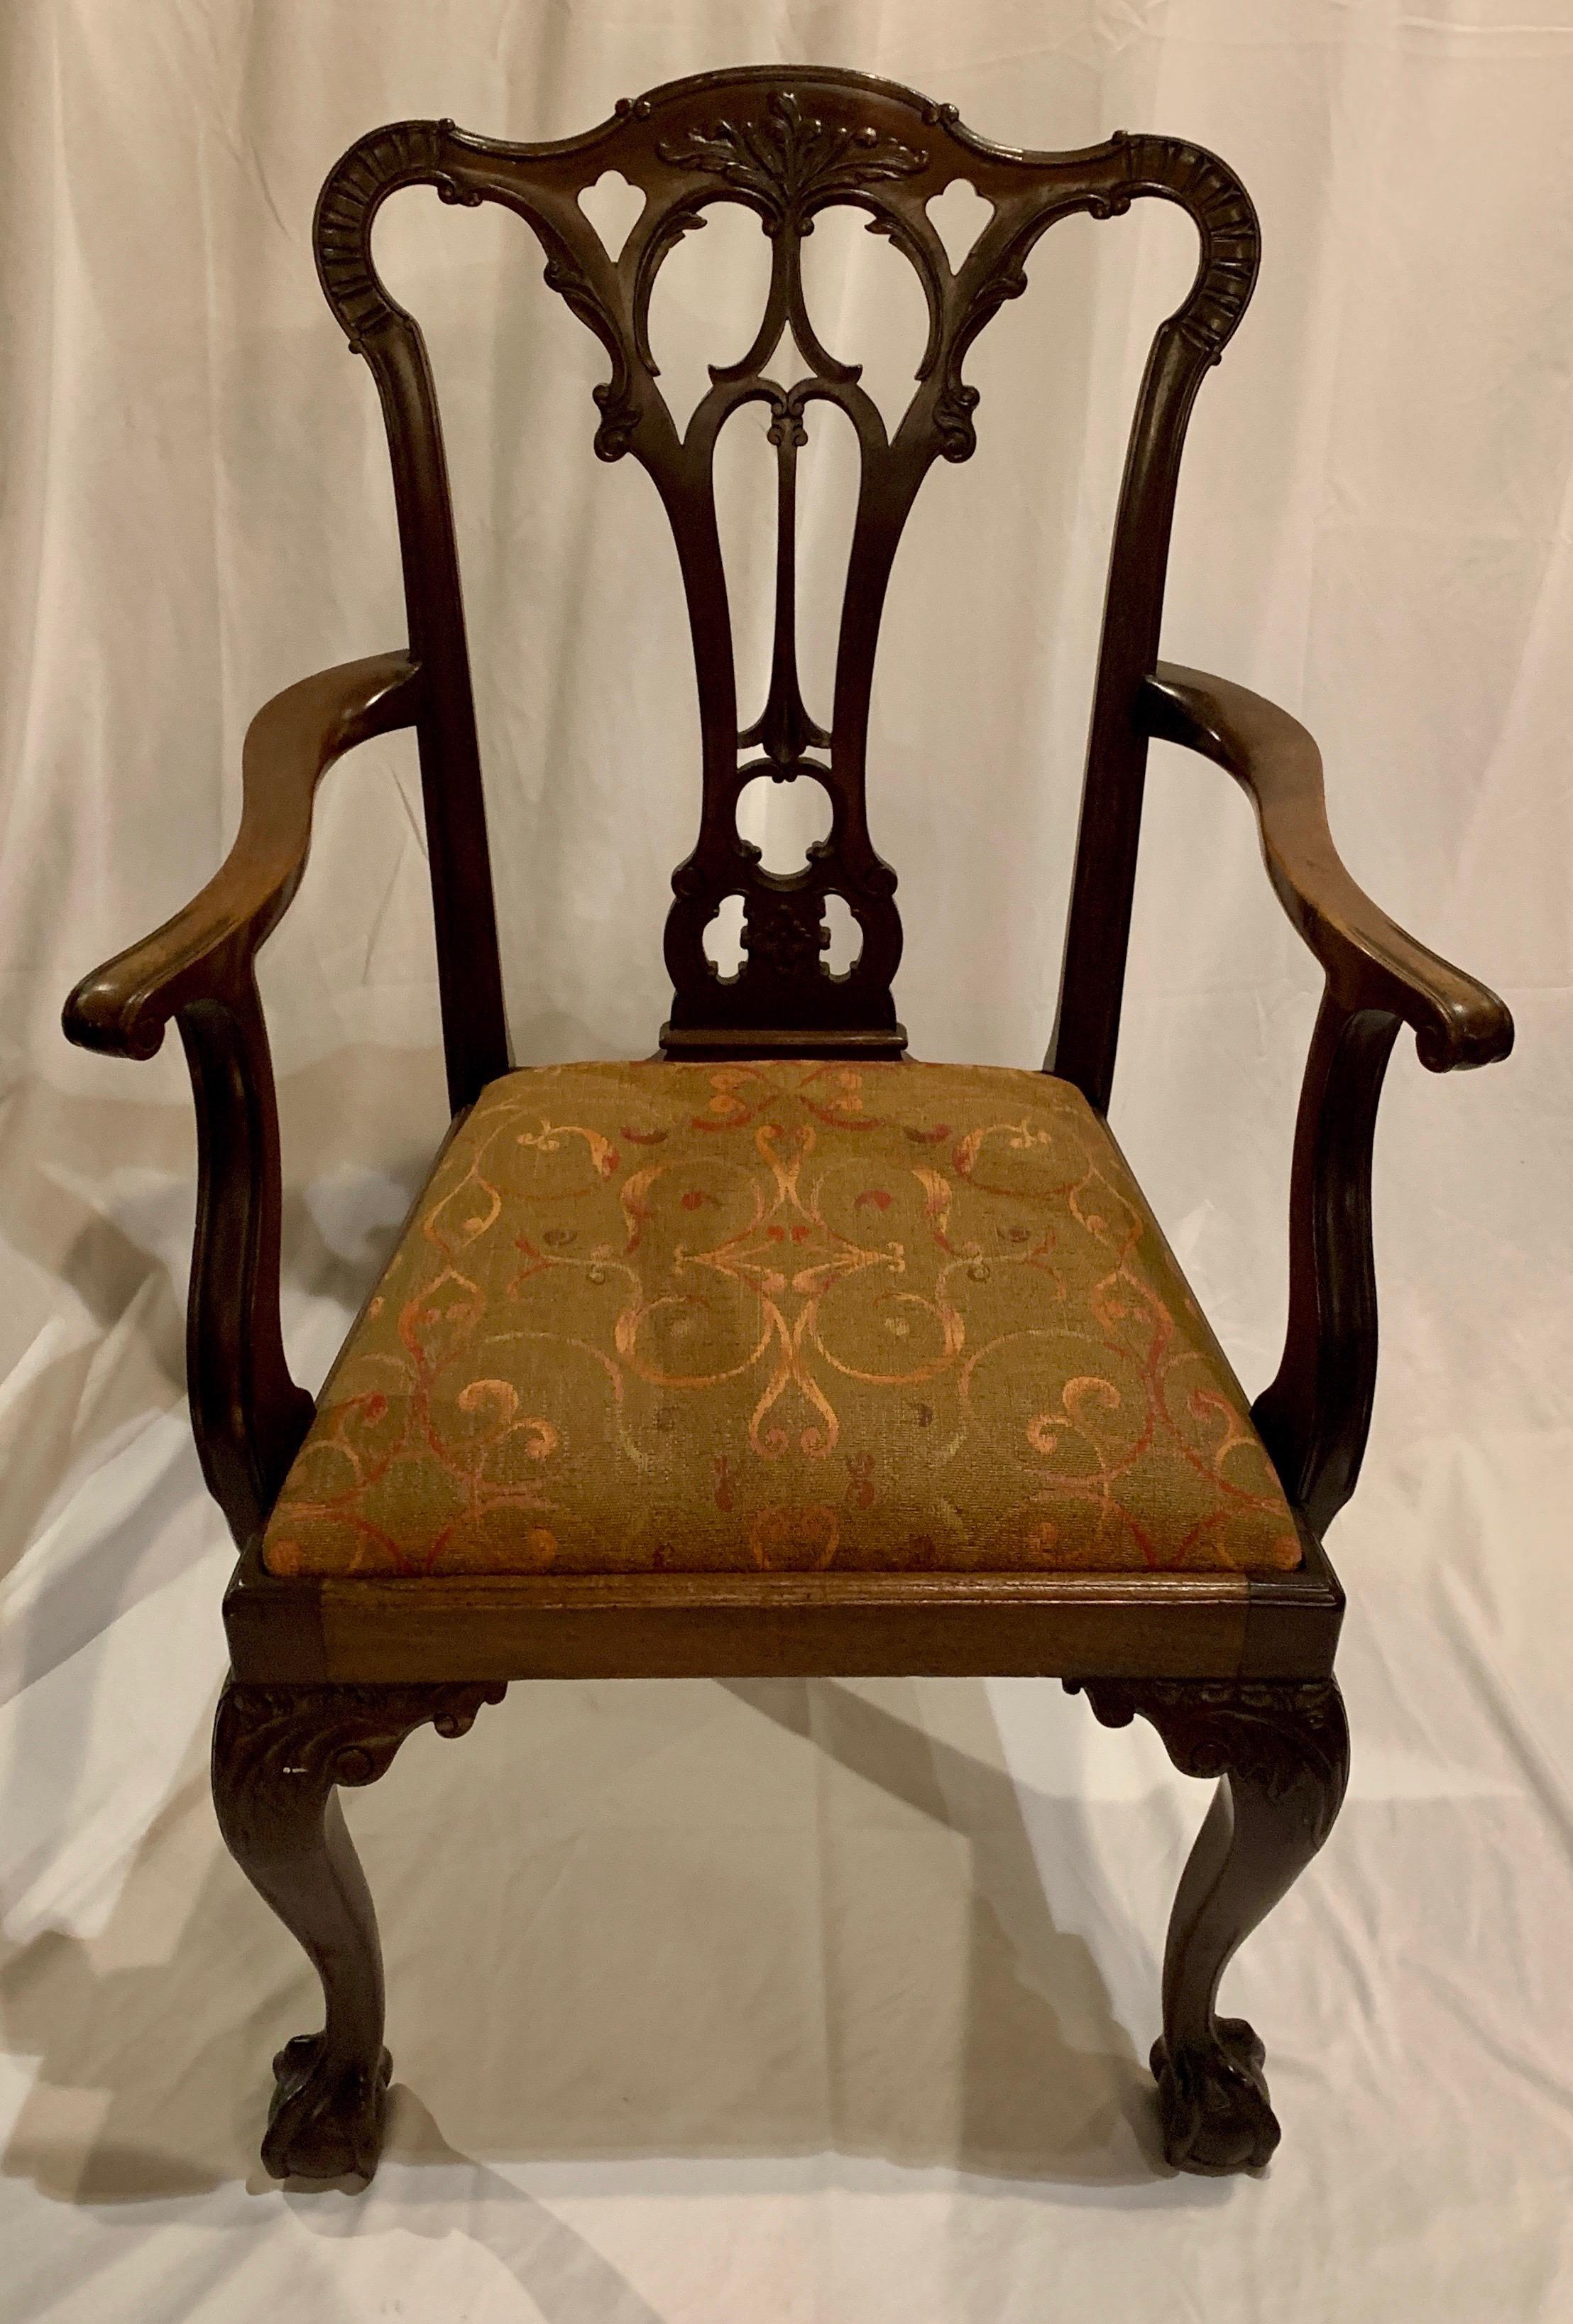 A fine example of English woodwork in this single armchair.
 